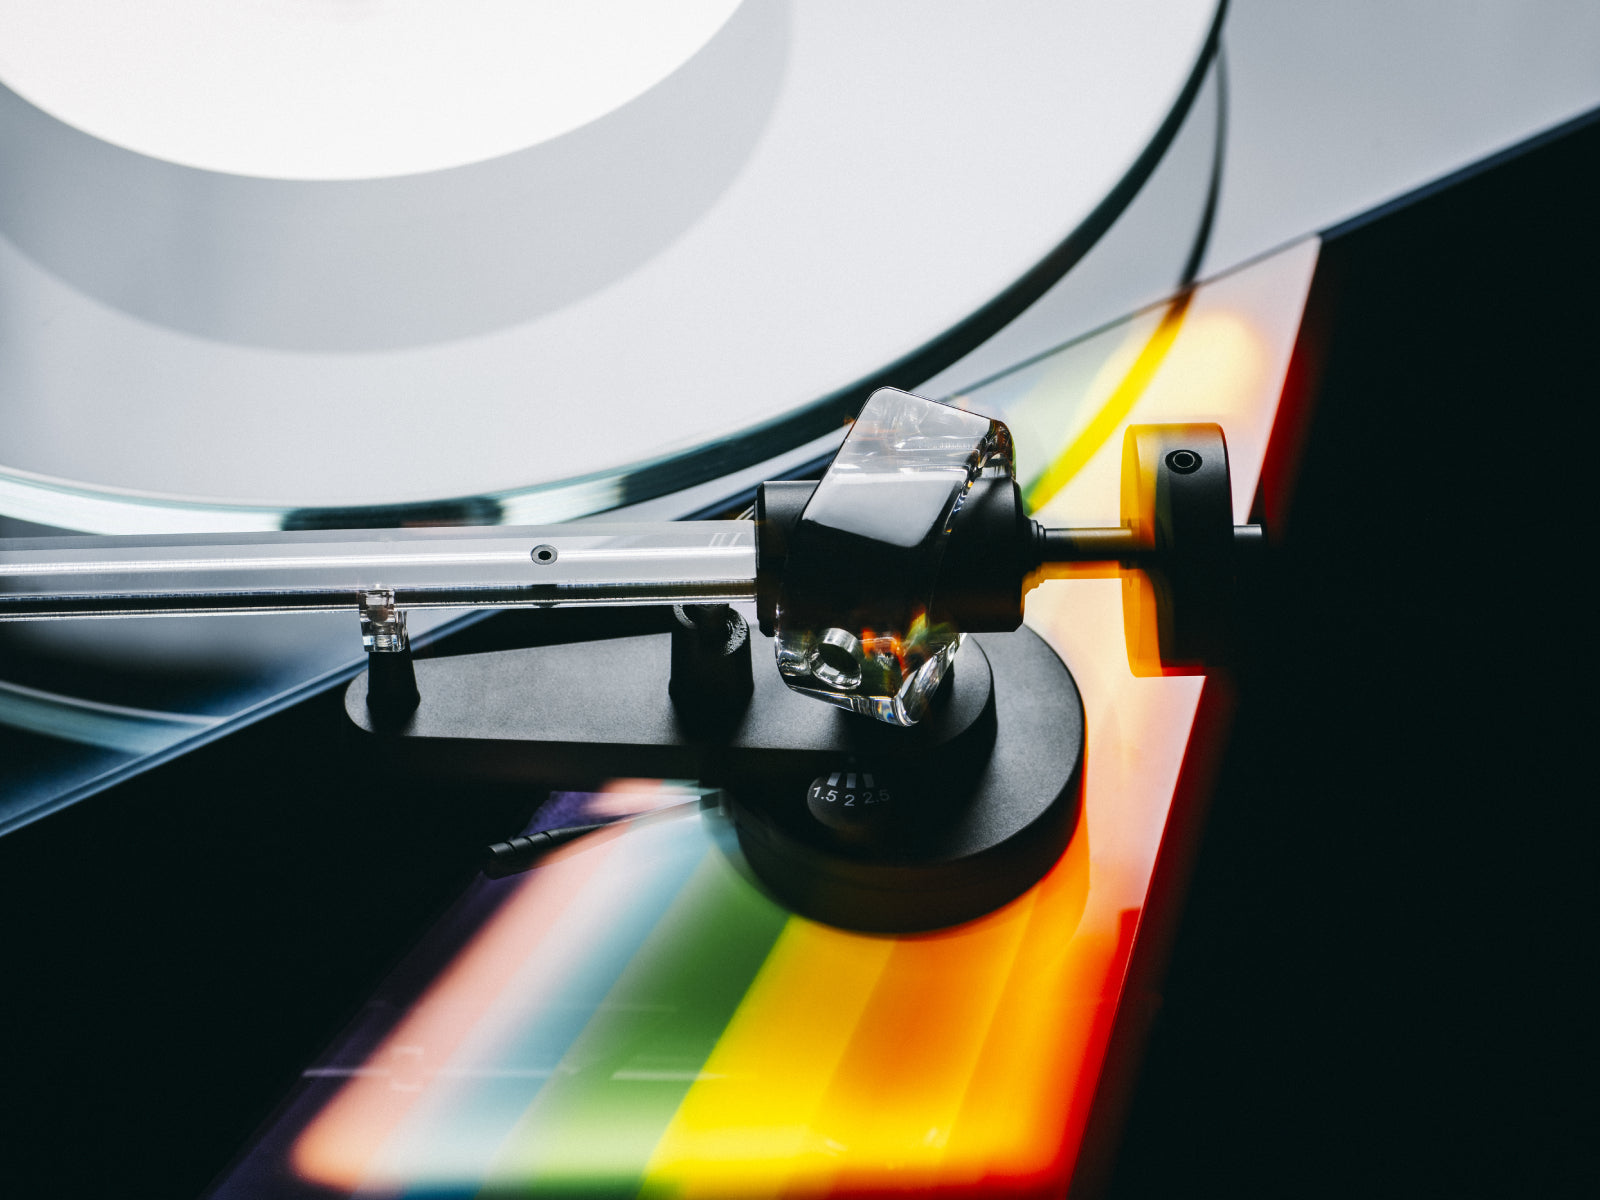 Pro-Ject 'The Dark Side of the Moon' Turntable